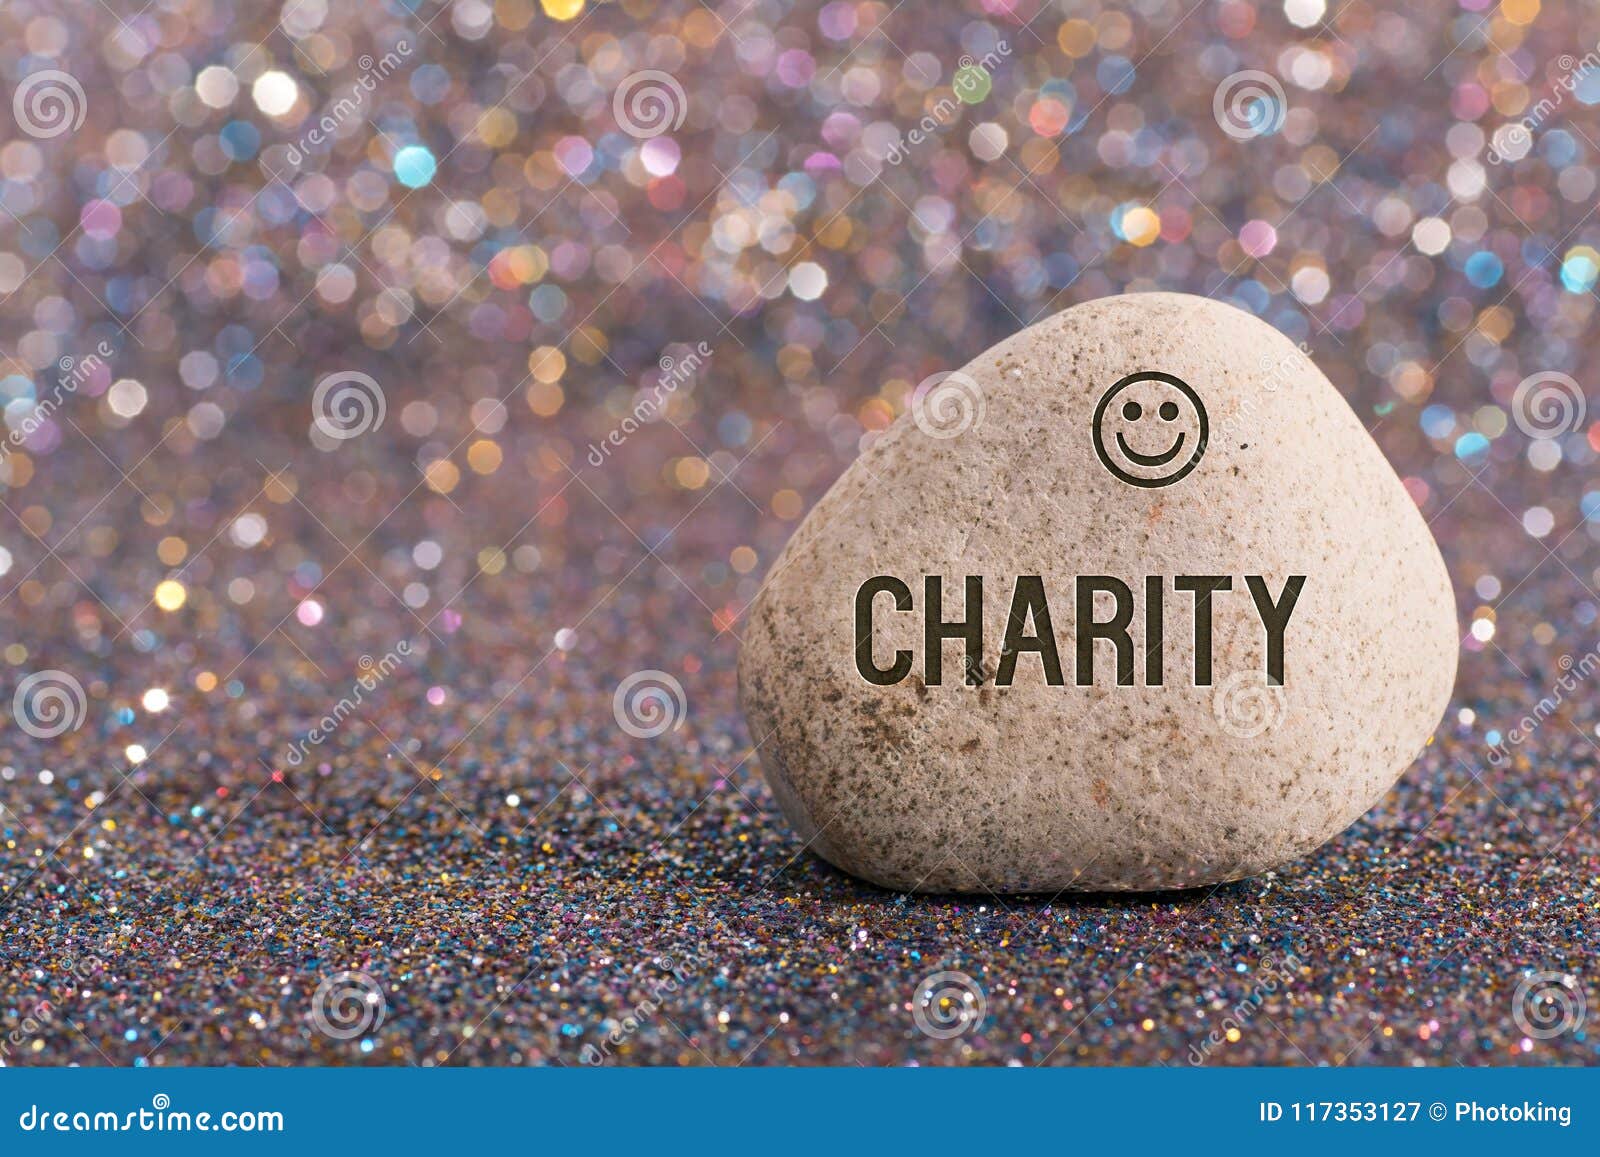 charity on stone